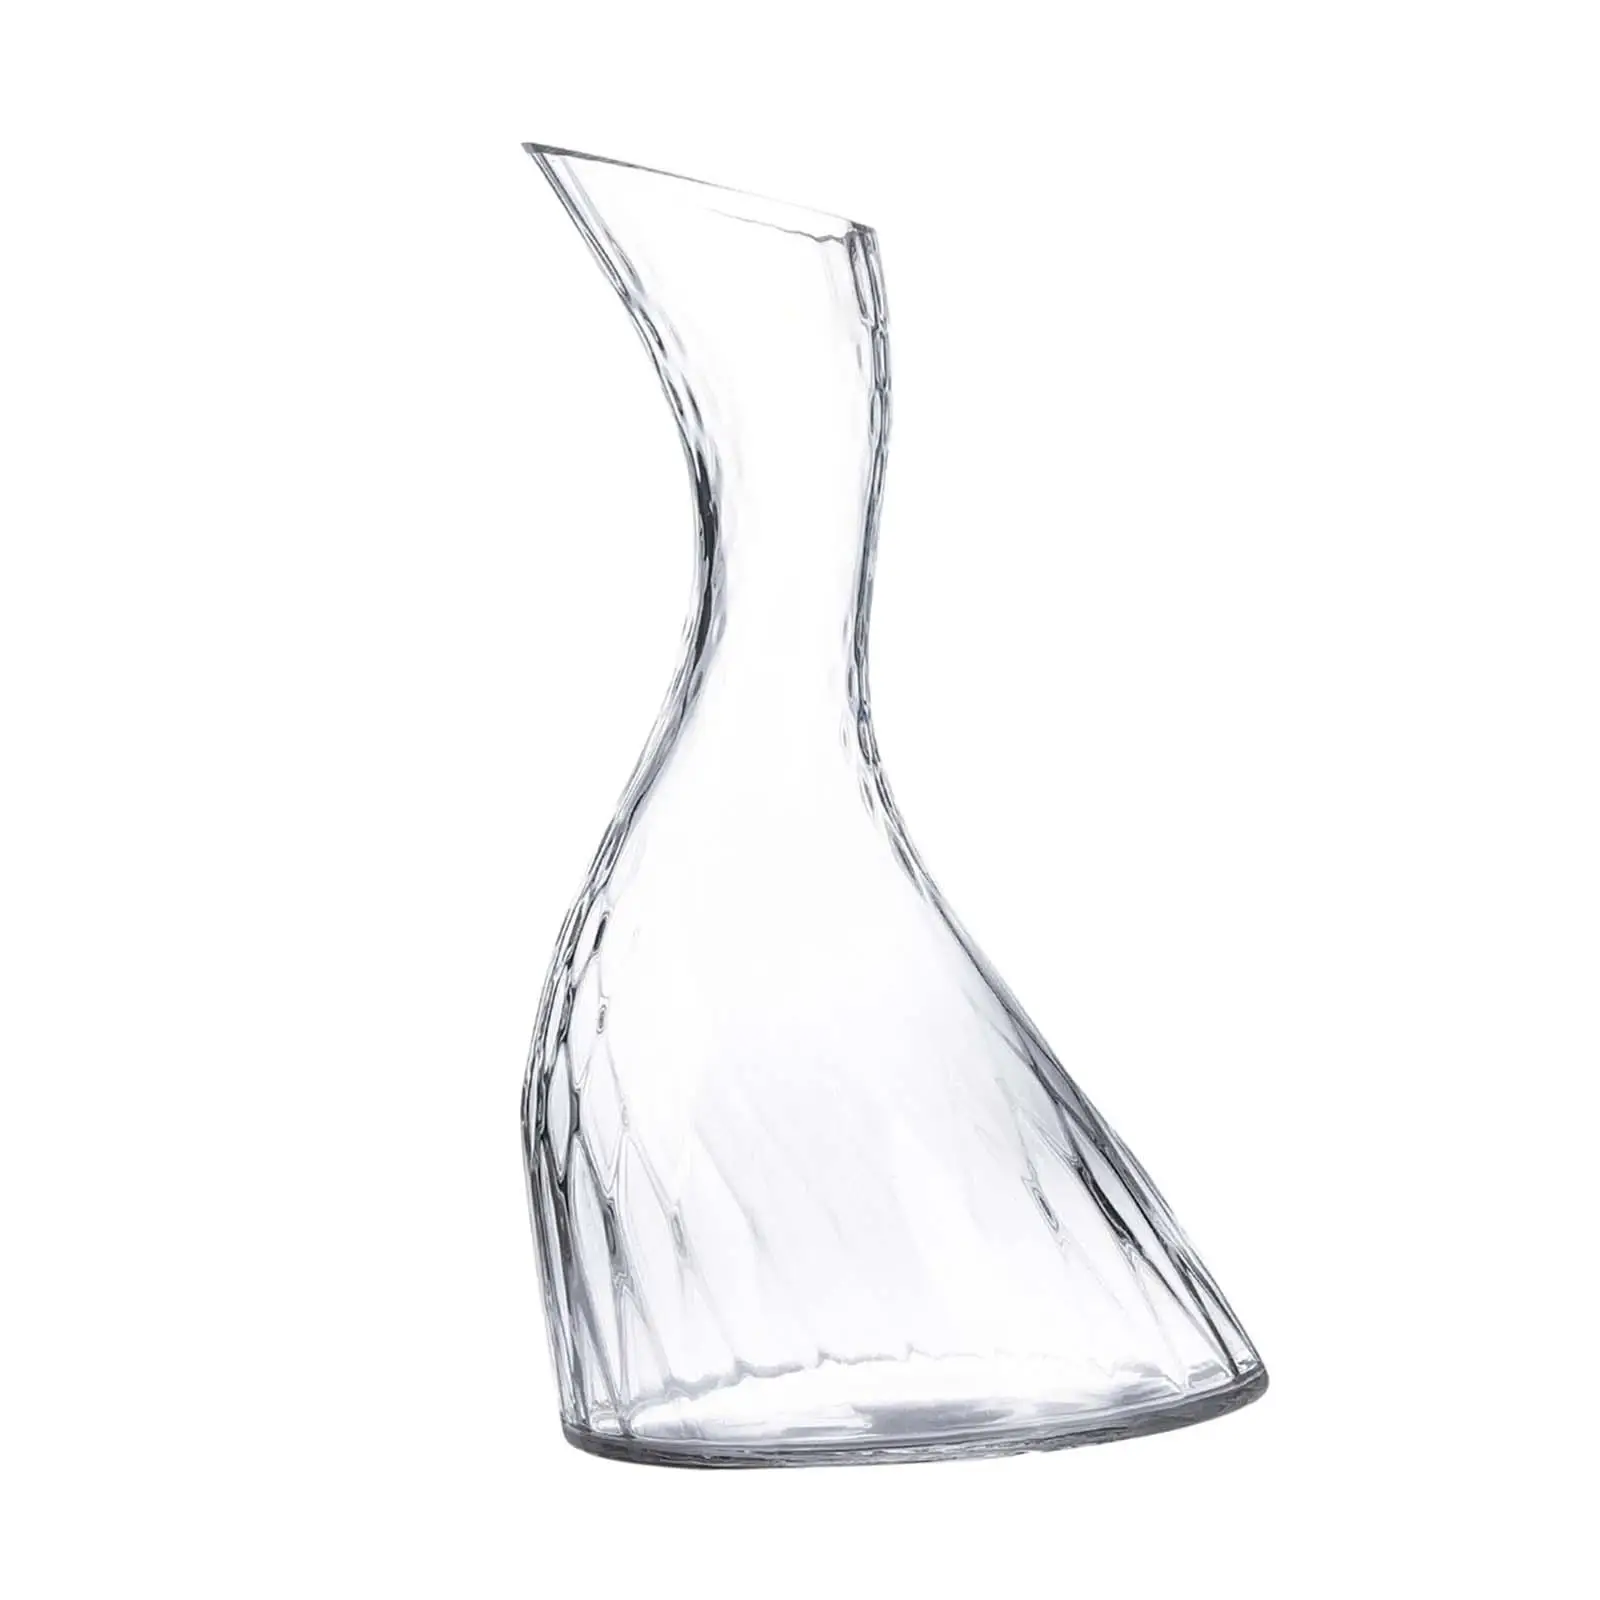 1500ml Swan Container Drink Dispenser Hand Blown Glass Decanter Gift for Party Decoration Hotel Home Restaurant Dining Room